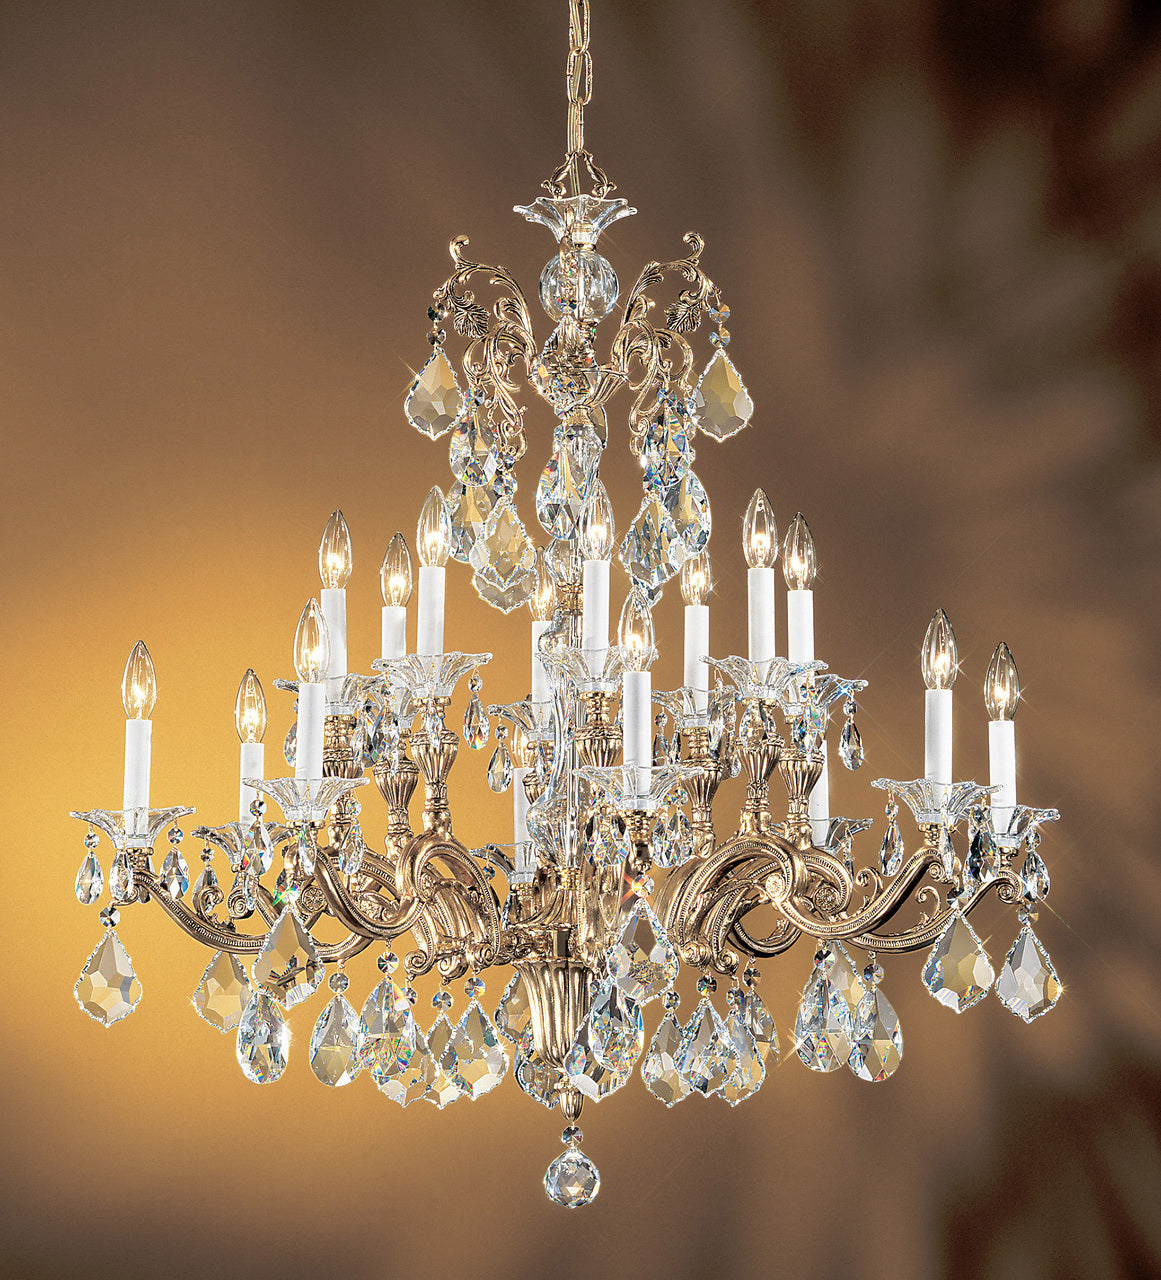 Classic Lighting 57116 BBK SC Via Firenze Crystal Chandelier in Bronze/Black Patina (Imported from Spain)